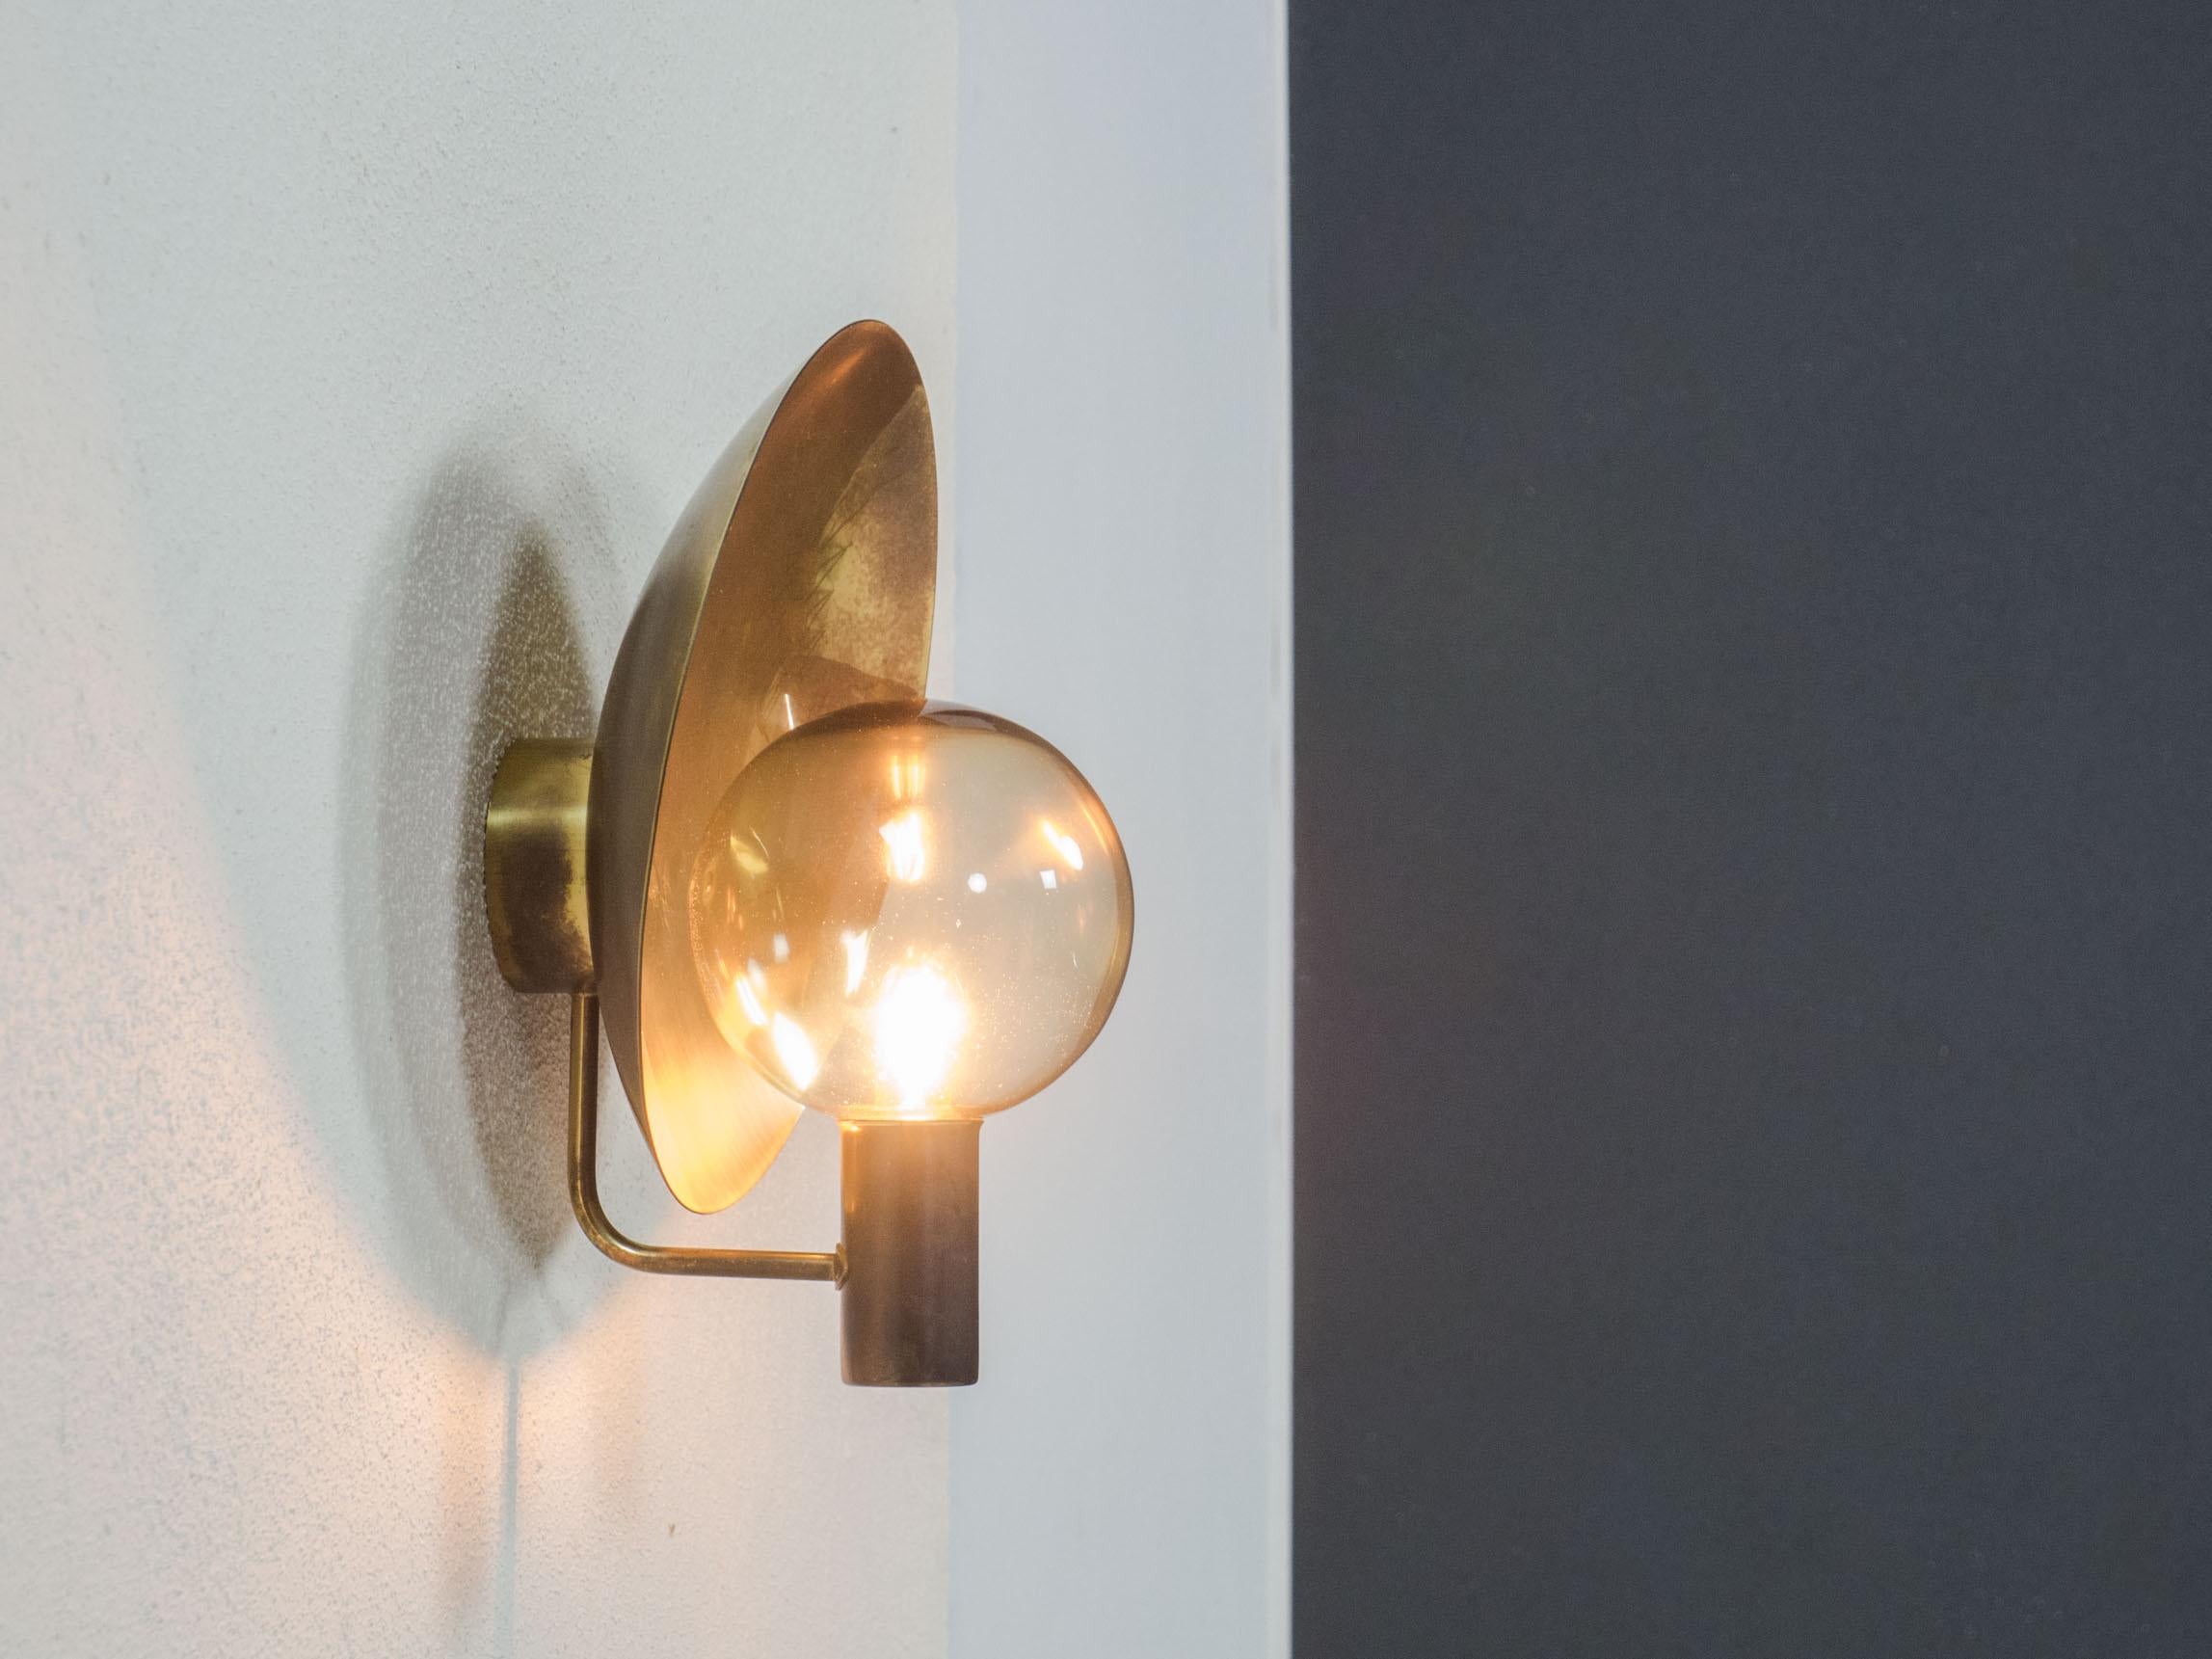 Rare wall sconce designed by the famous Hans-Agne Jakobsson for AB Markaryd of Sweden in the 1960s.

This lamp is made of brass and a thin smoked glass shade.

The lamp is in very good condition, the brass is patinated all around and gives this lamp